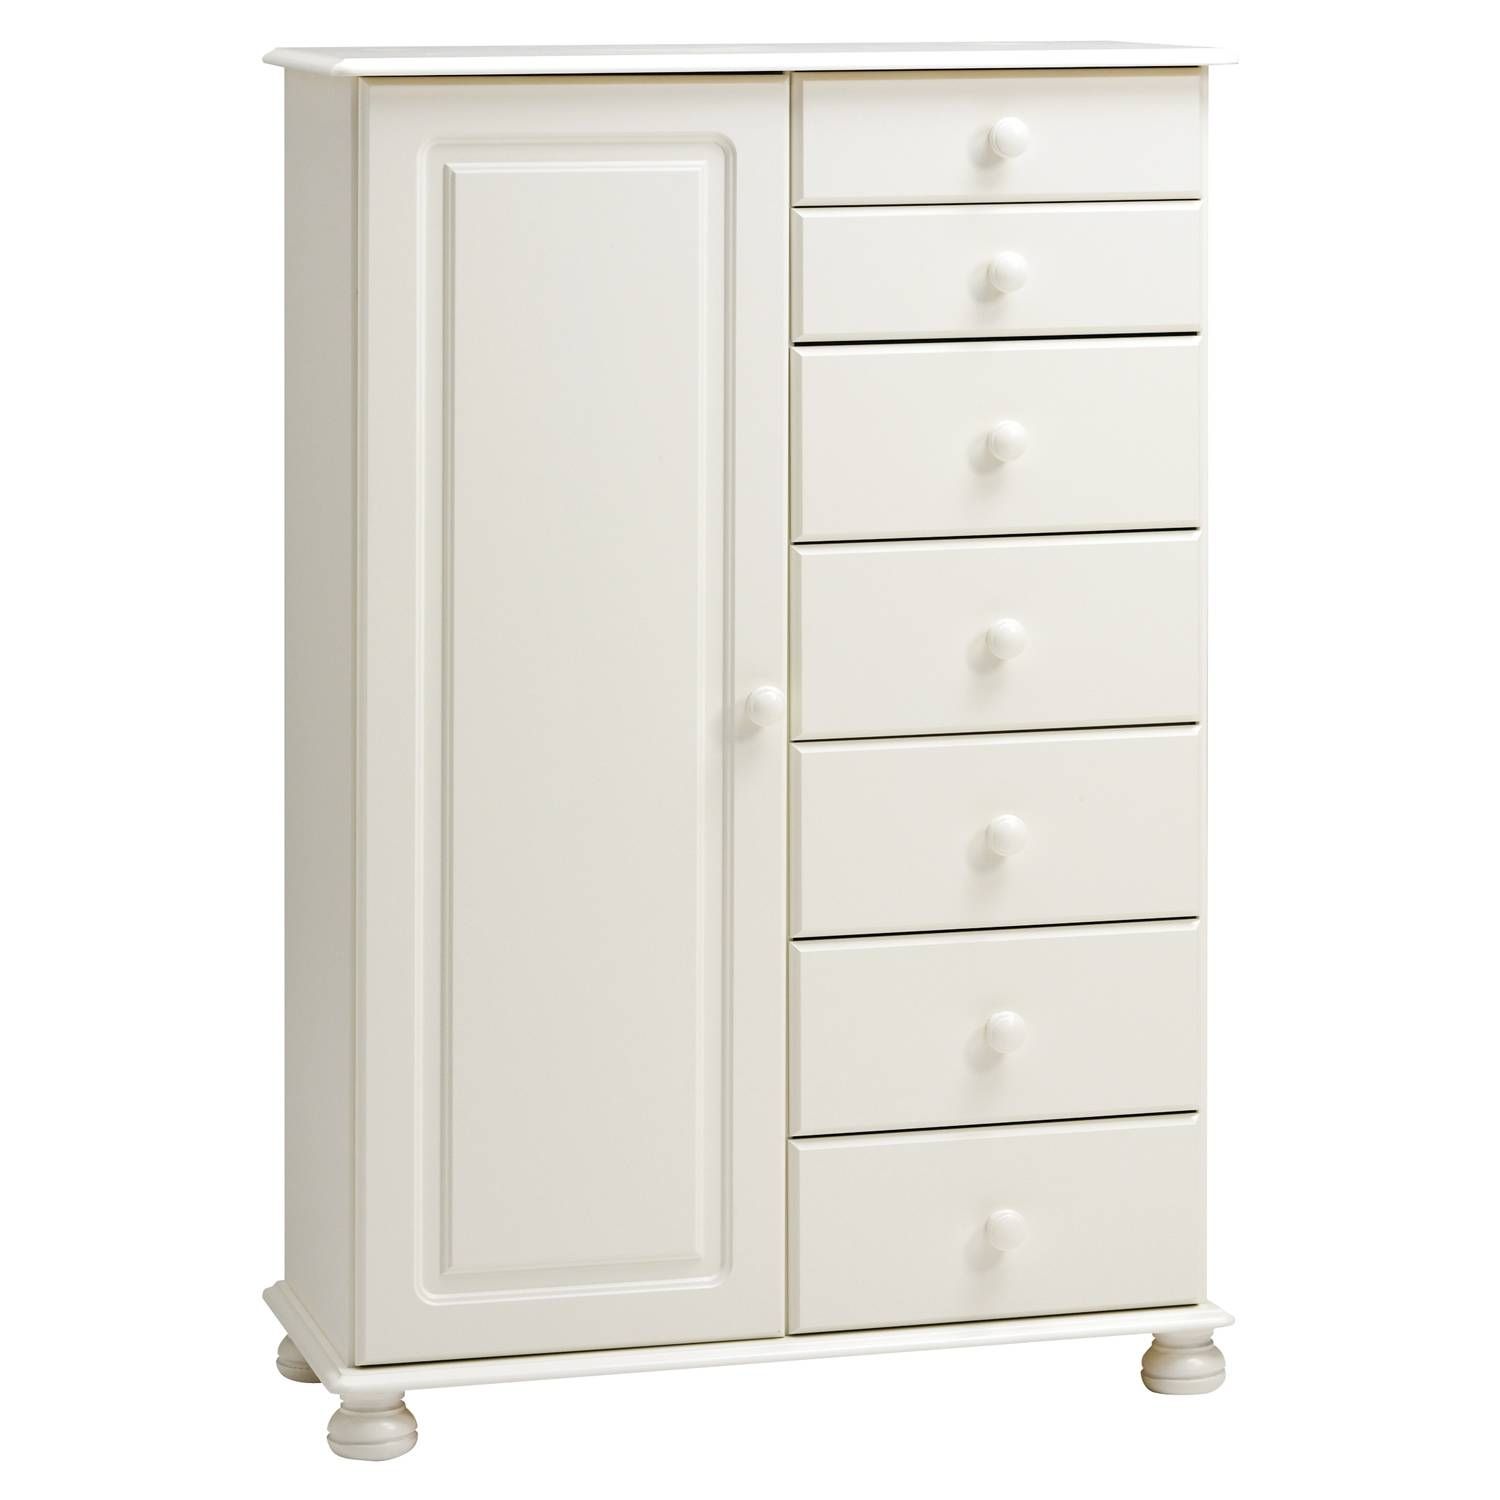 Richmond 2 Door 2 Drawer Wardrobe Antique Pine – Simply Furniture For Combi Wardrobes (View 2 of 15)